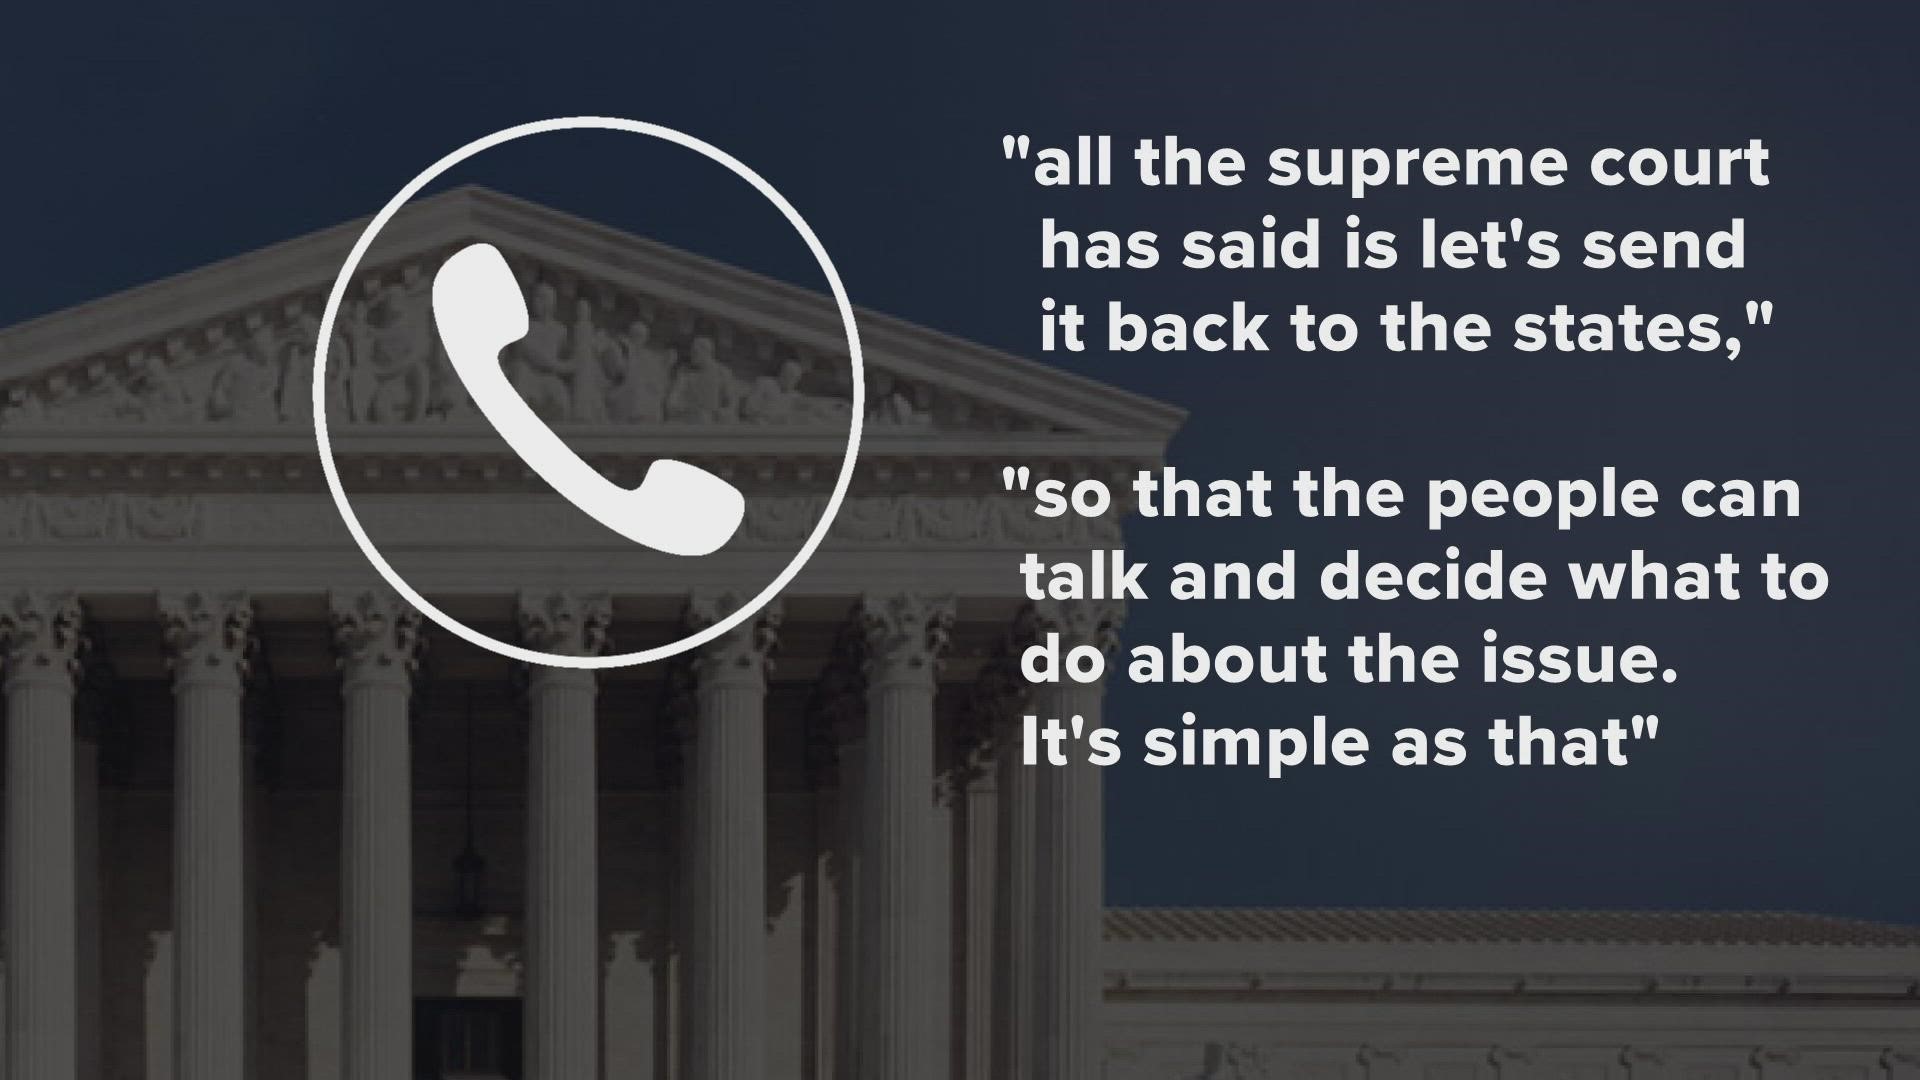 You can share your thoughts on the SCOTUS decision by leaving us a voicemail at (865) 407-0116.